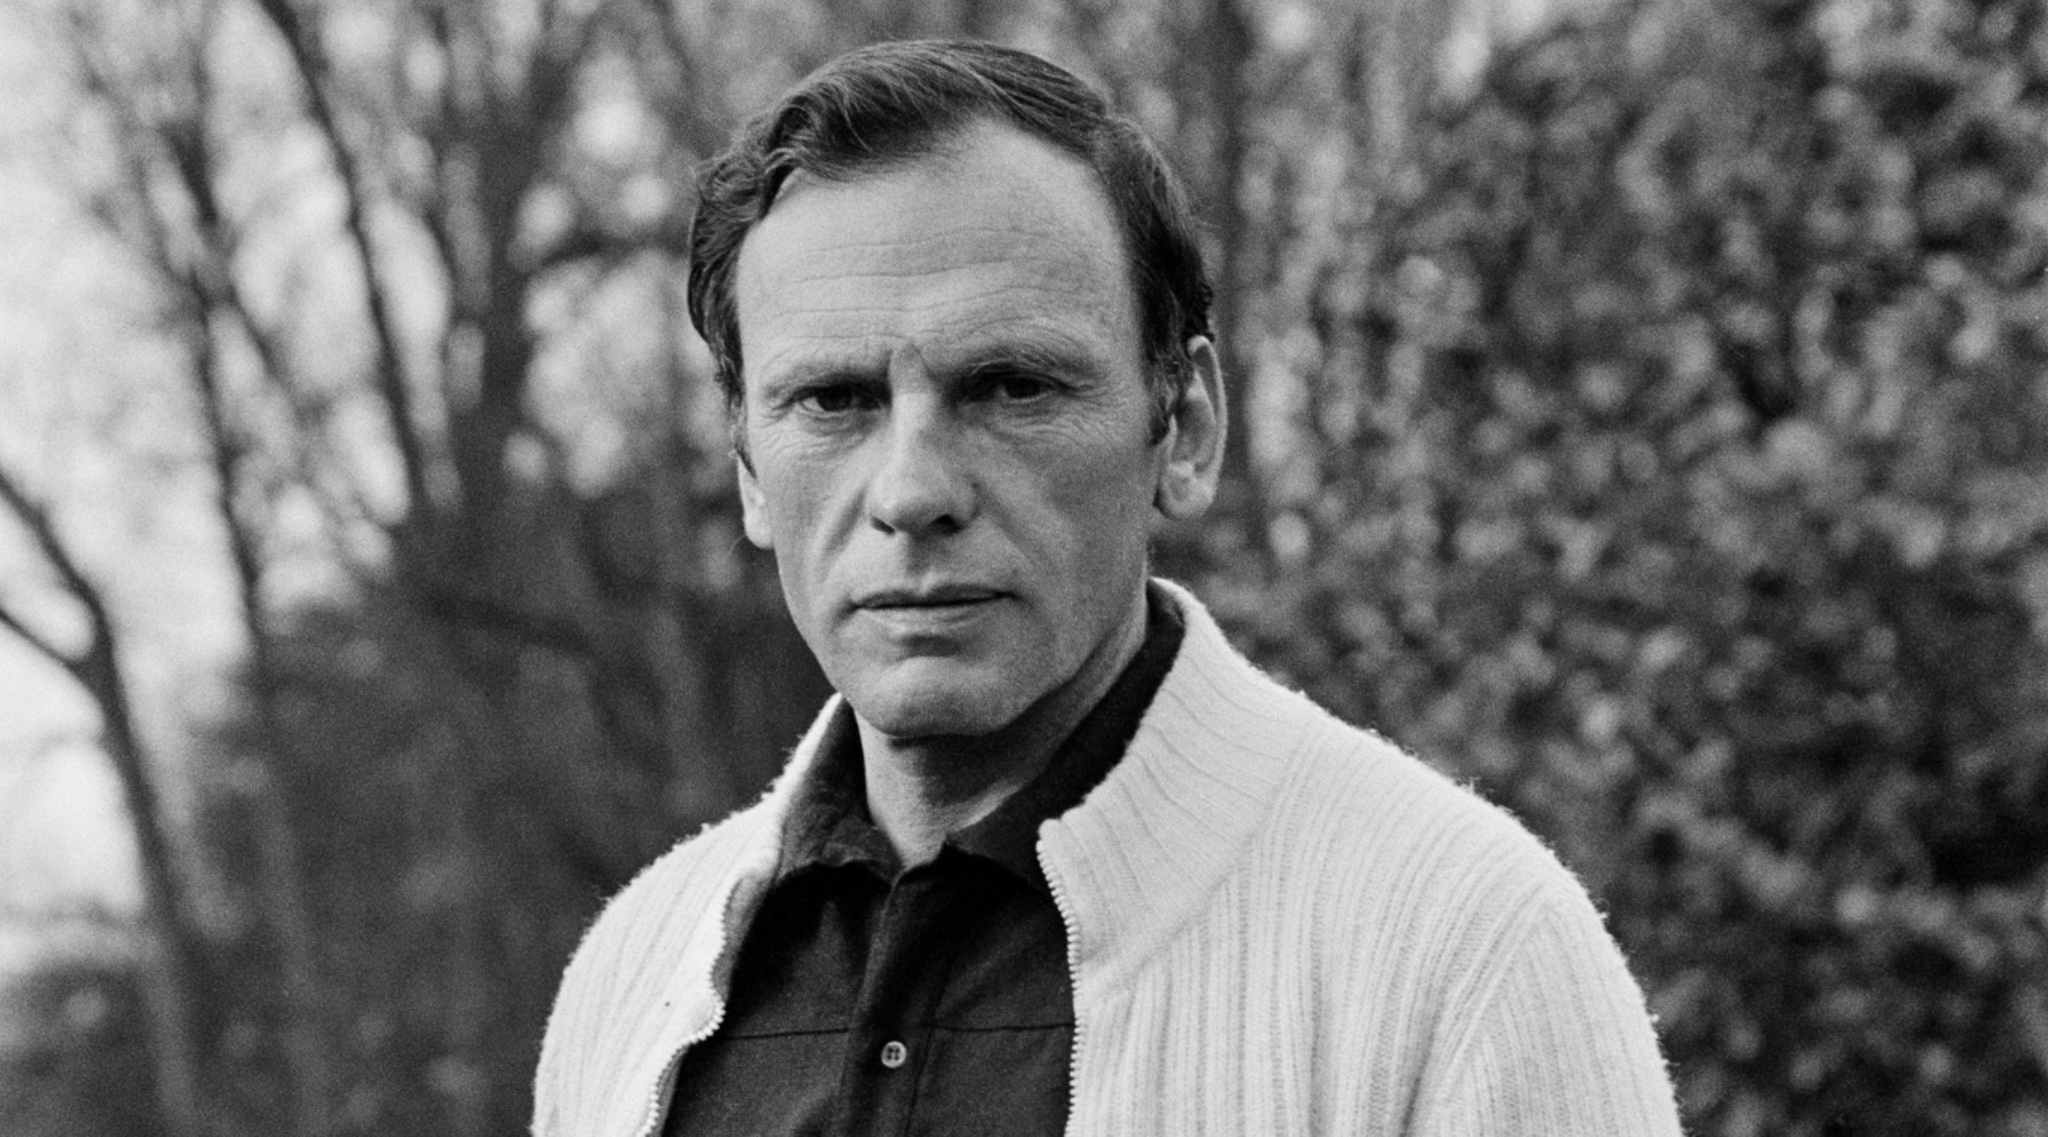 Jean-Louis Trintignant, Acclaimed French Actor, Dies at 91